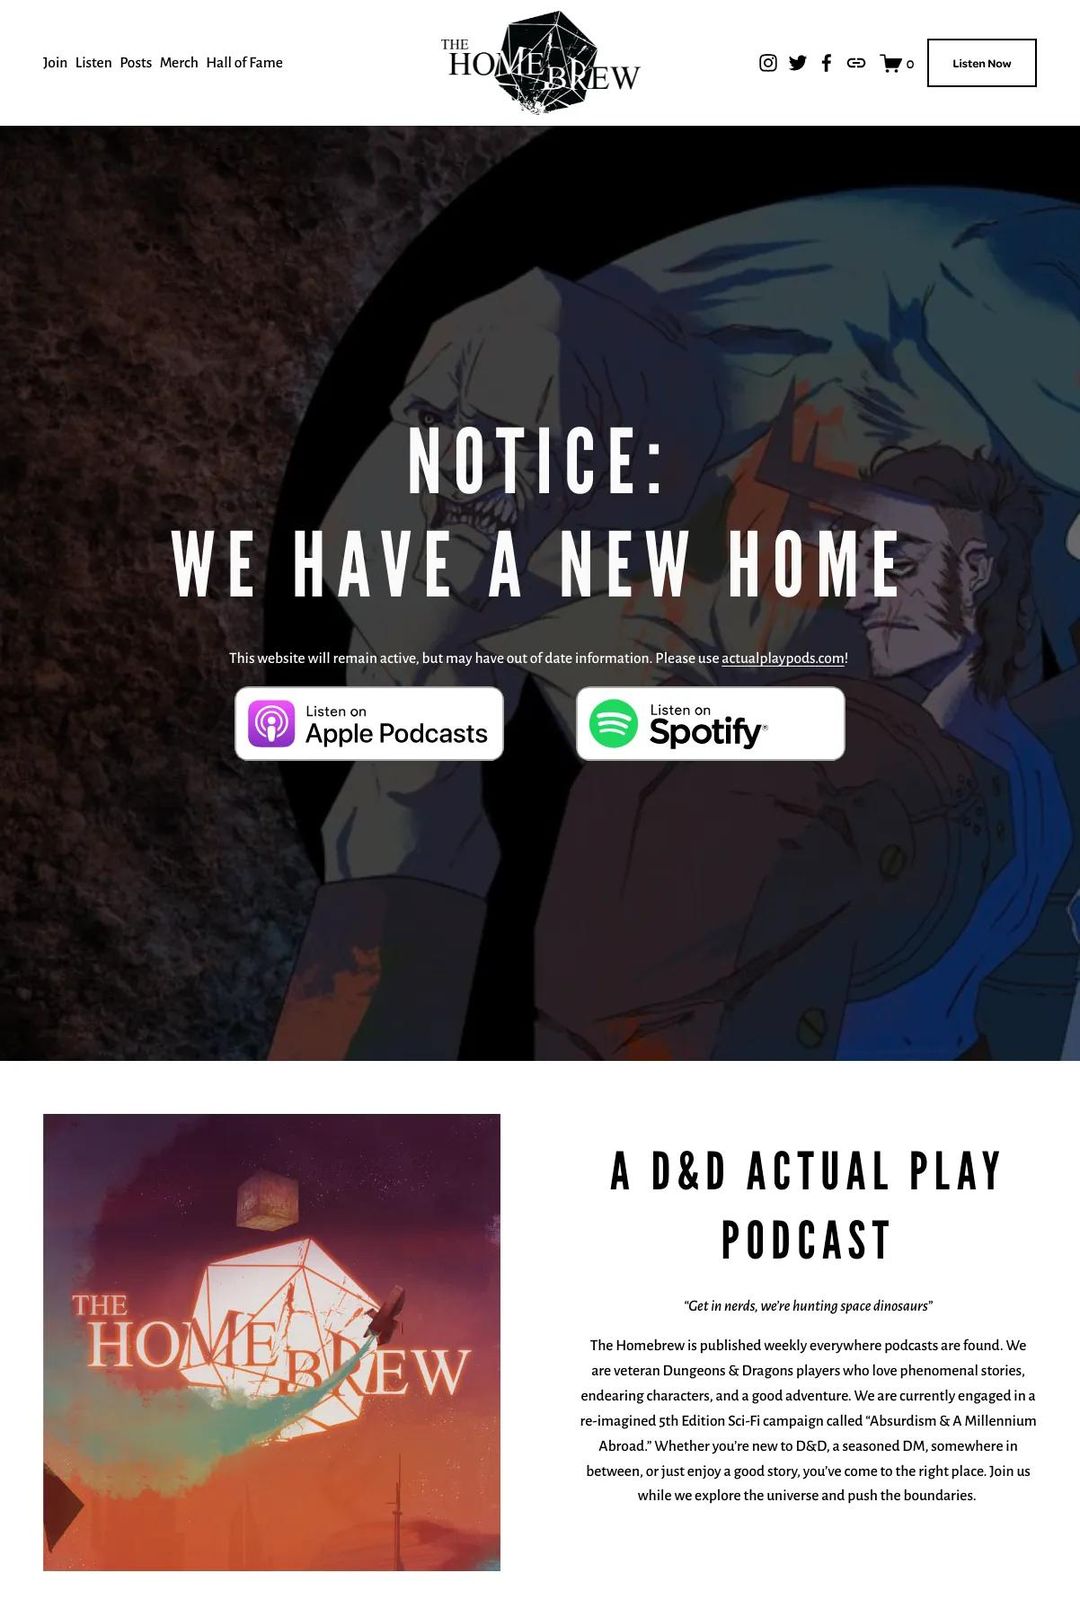 Screenshot 1 of The Homebrew (Example Squarespace Podcast Website)